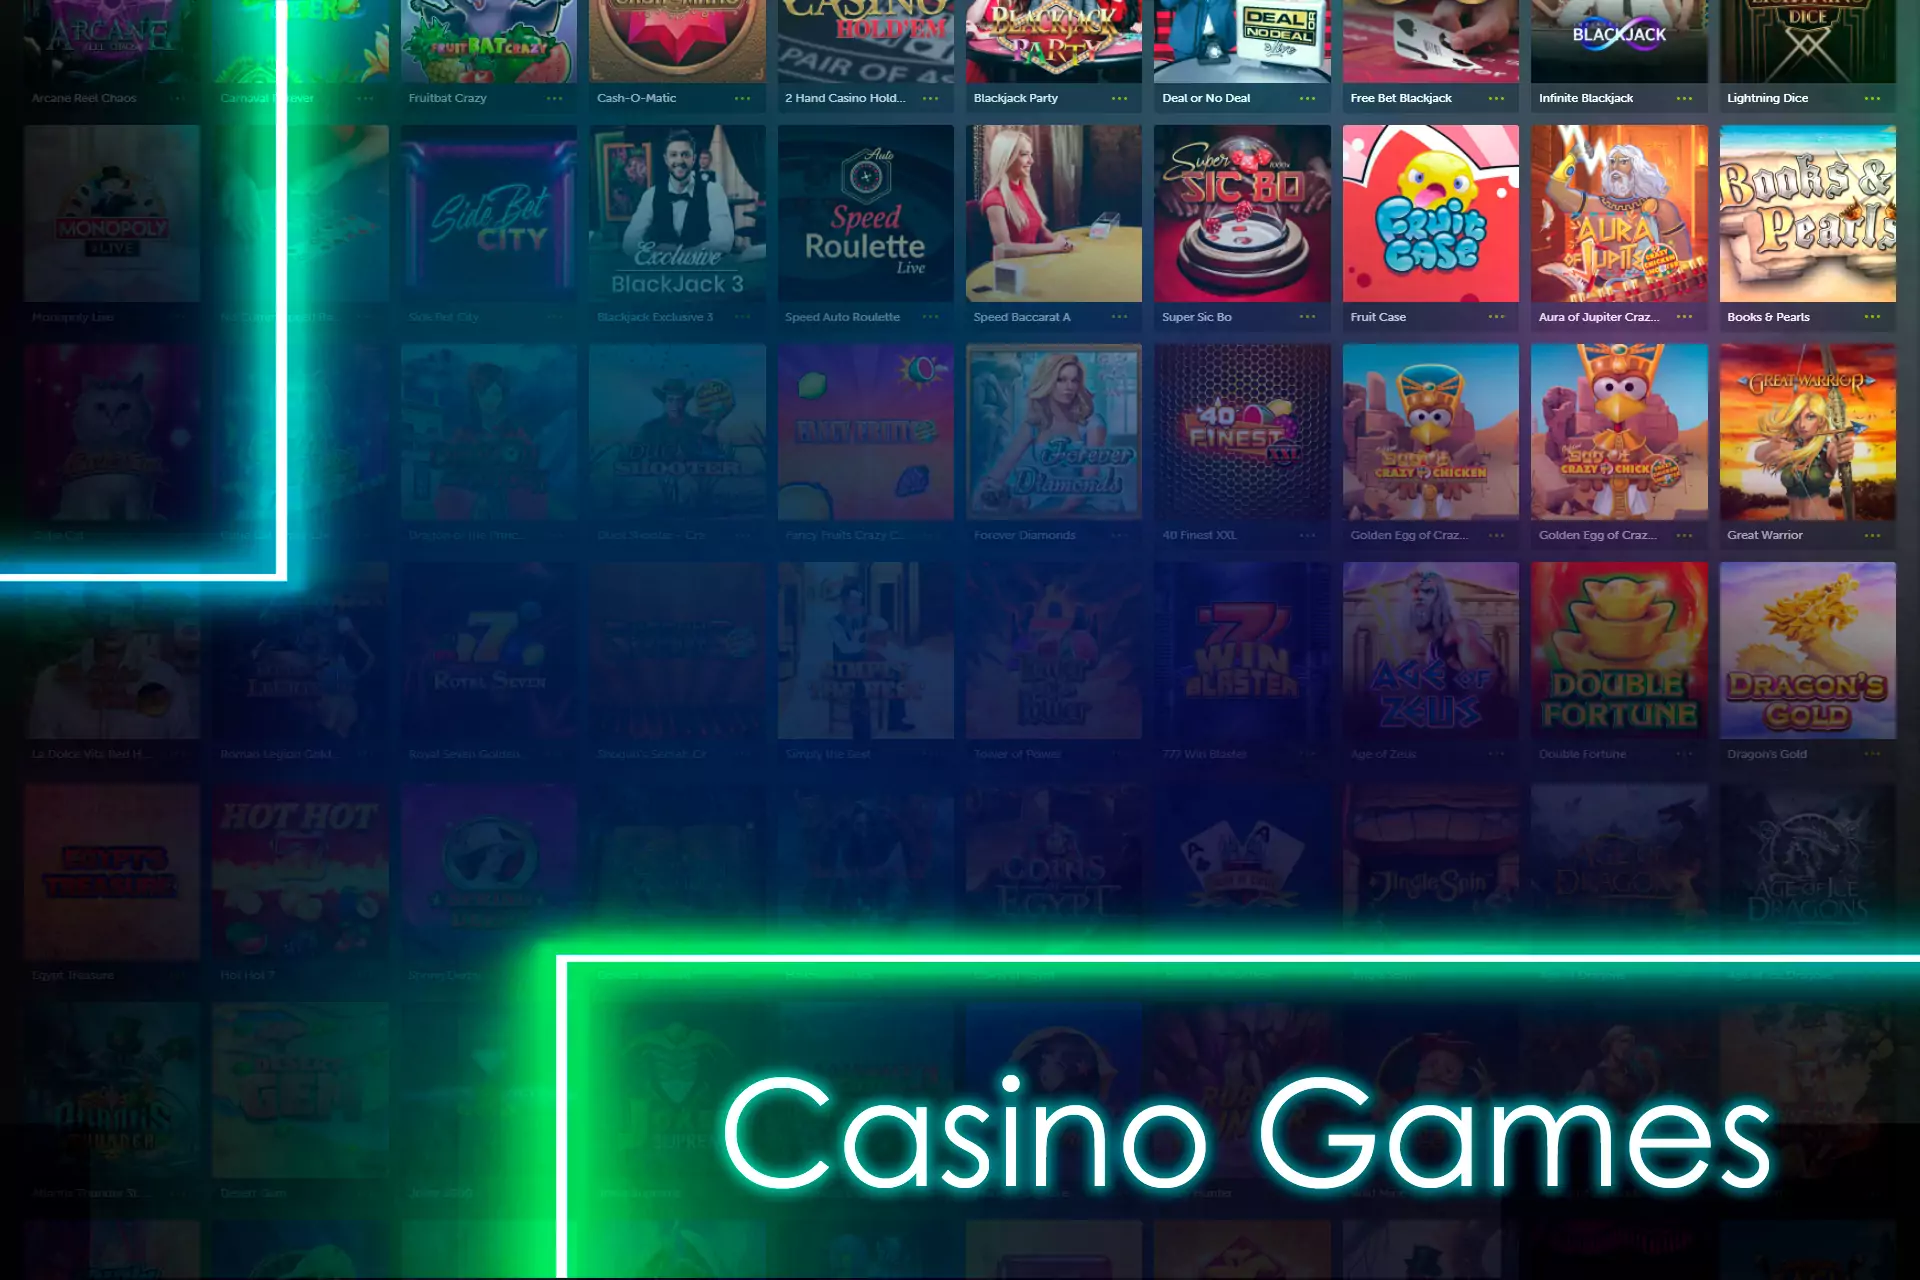 For casino fans, there are lots of slots and table games on Comeon.